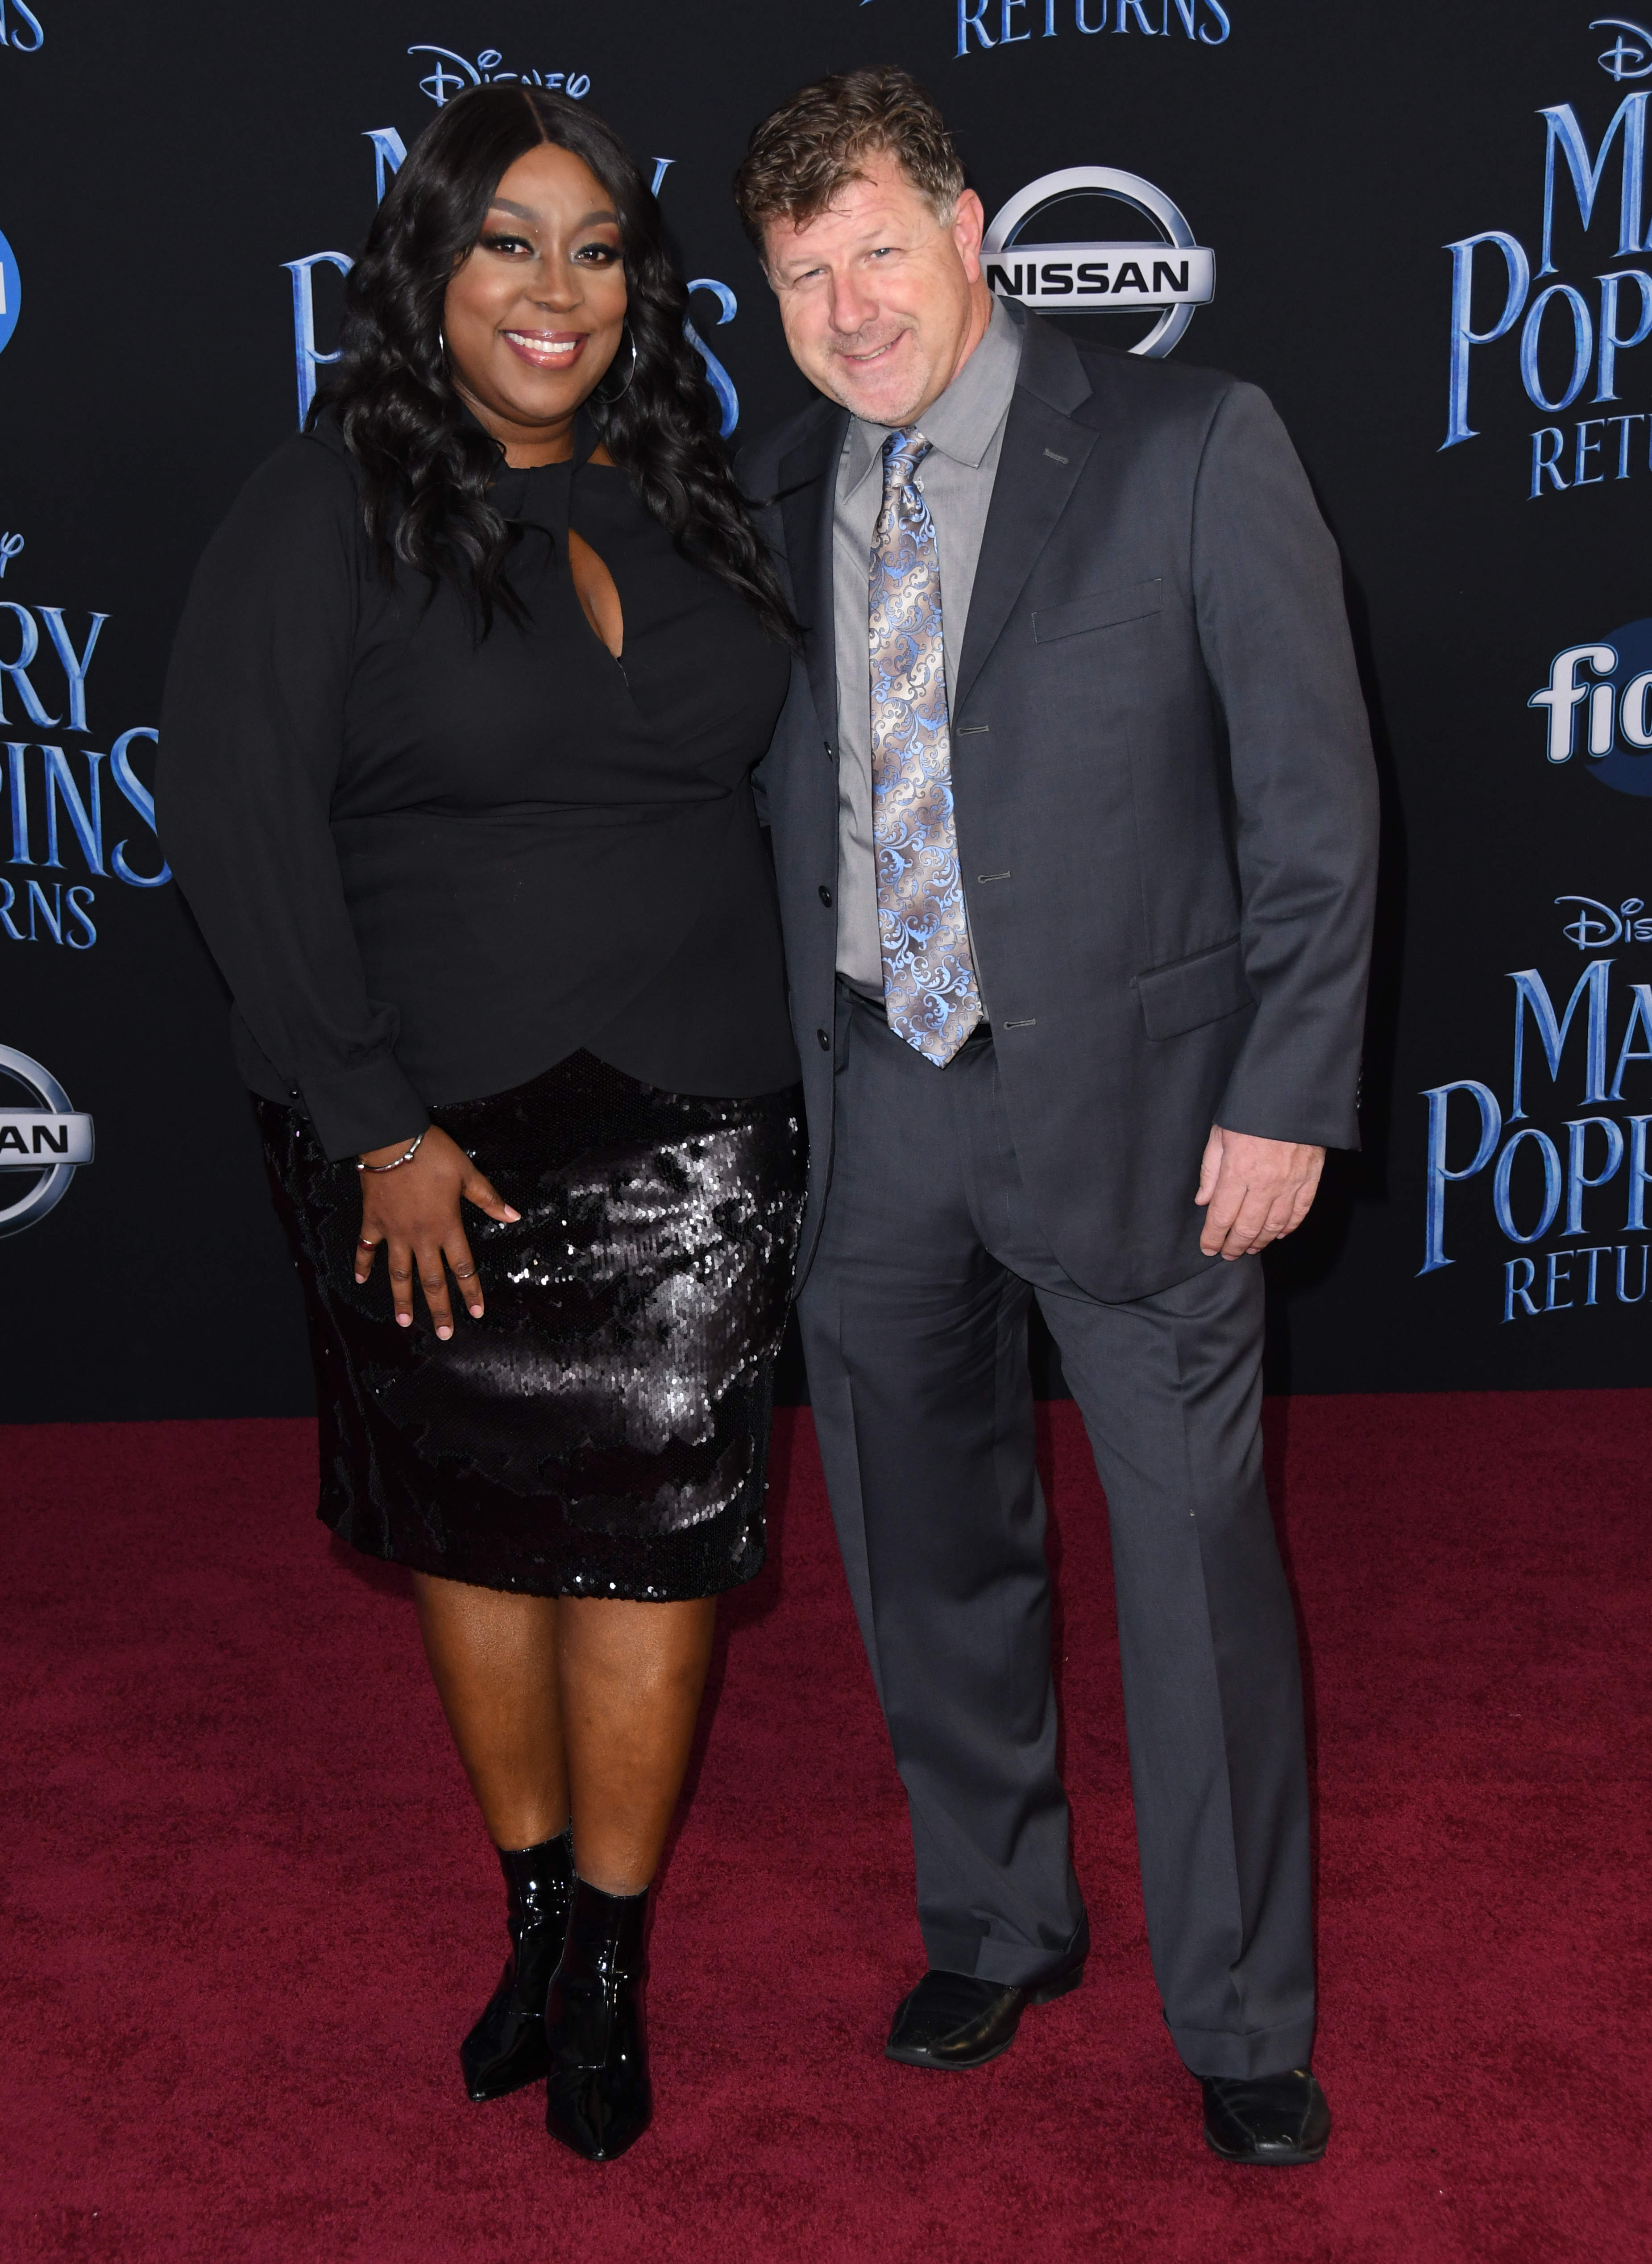 Loni Love Says She’s Put On “Happy Weight” Thanks To New Relationship